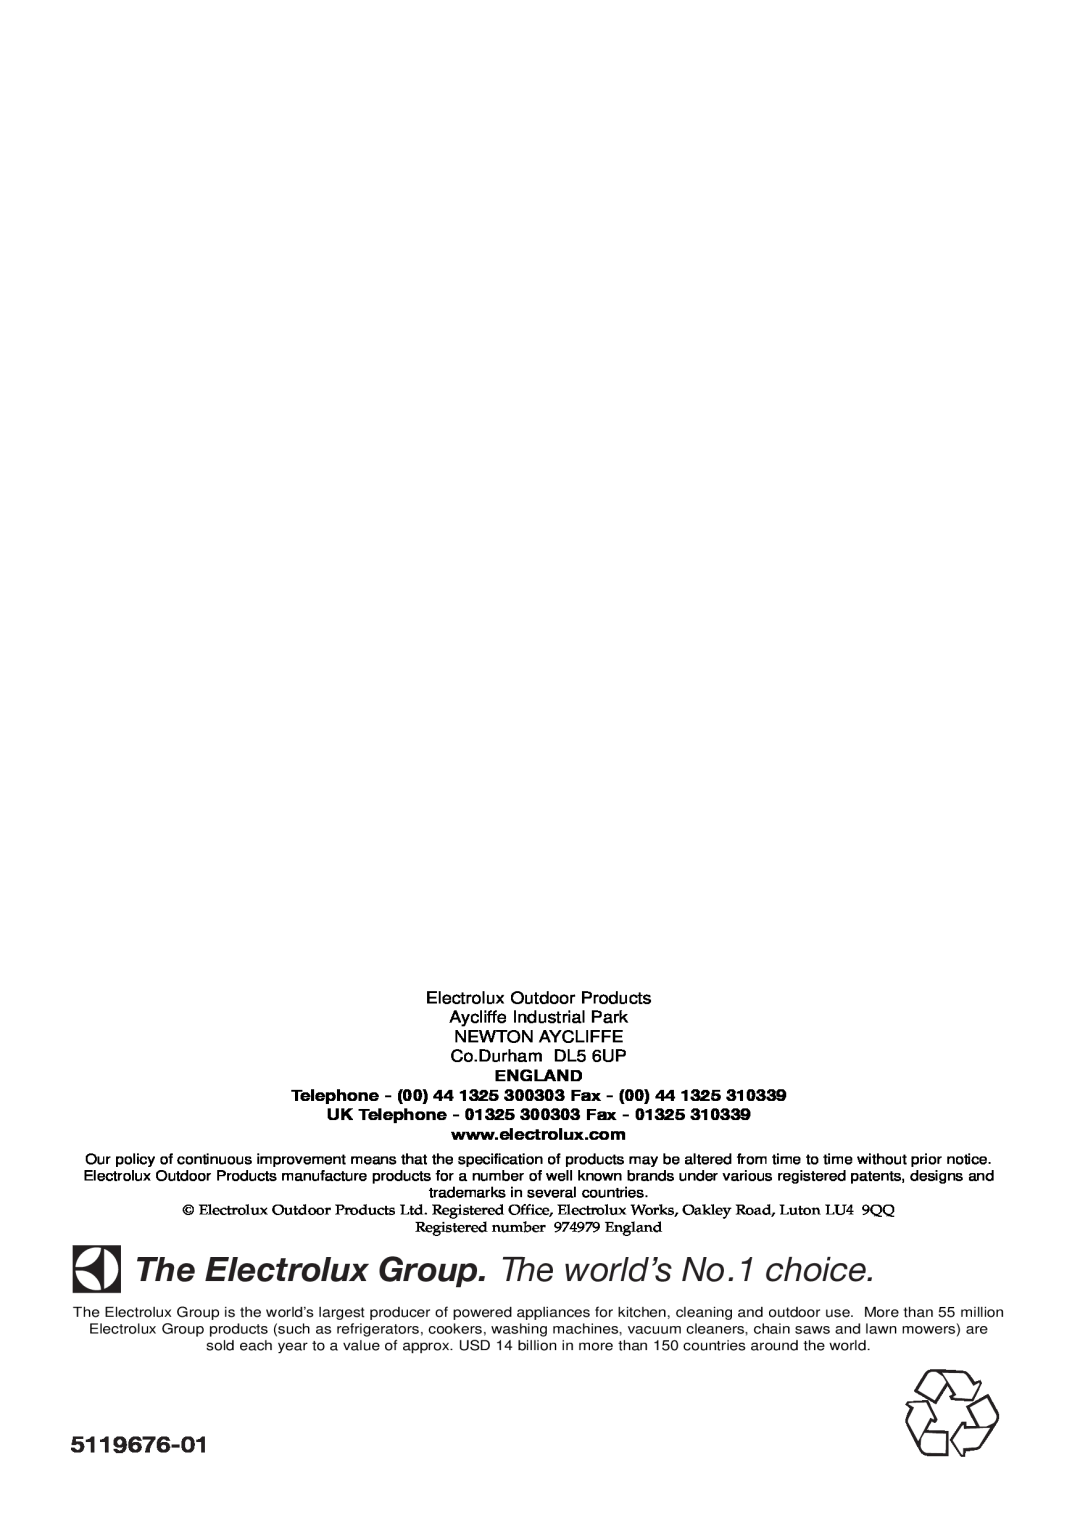 Electrolux 96487026200, ET500 5119676-01, The Electrolux Group. The world’s No.1 choice, UK Telephone - 01325 300303 Fax 